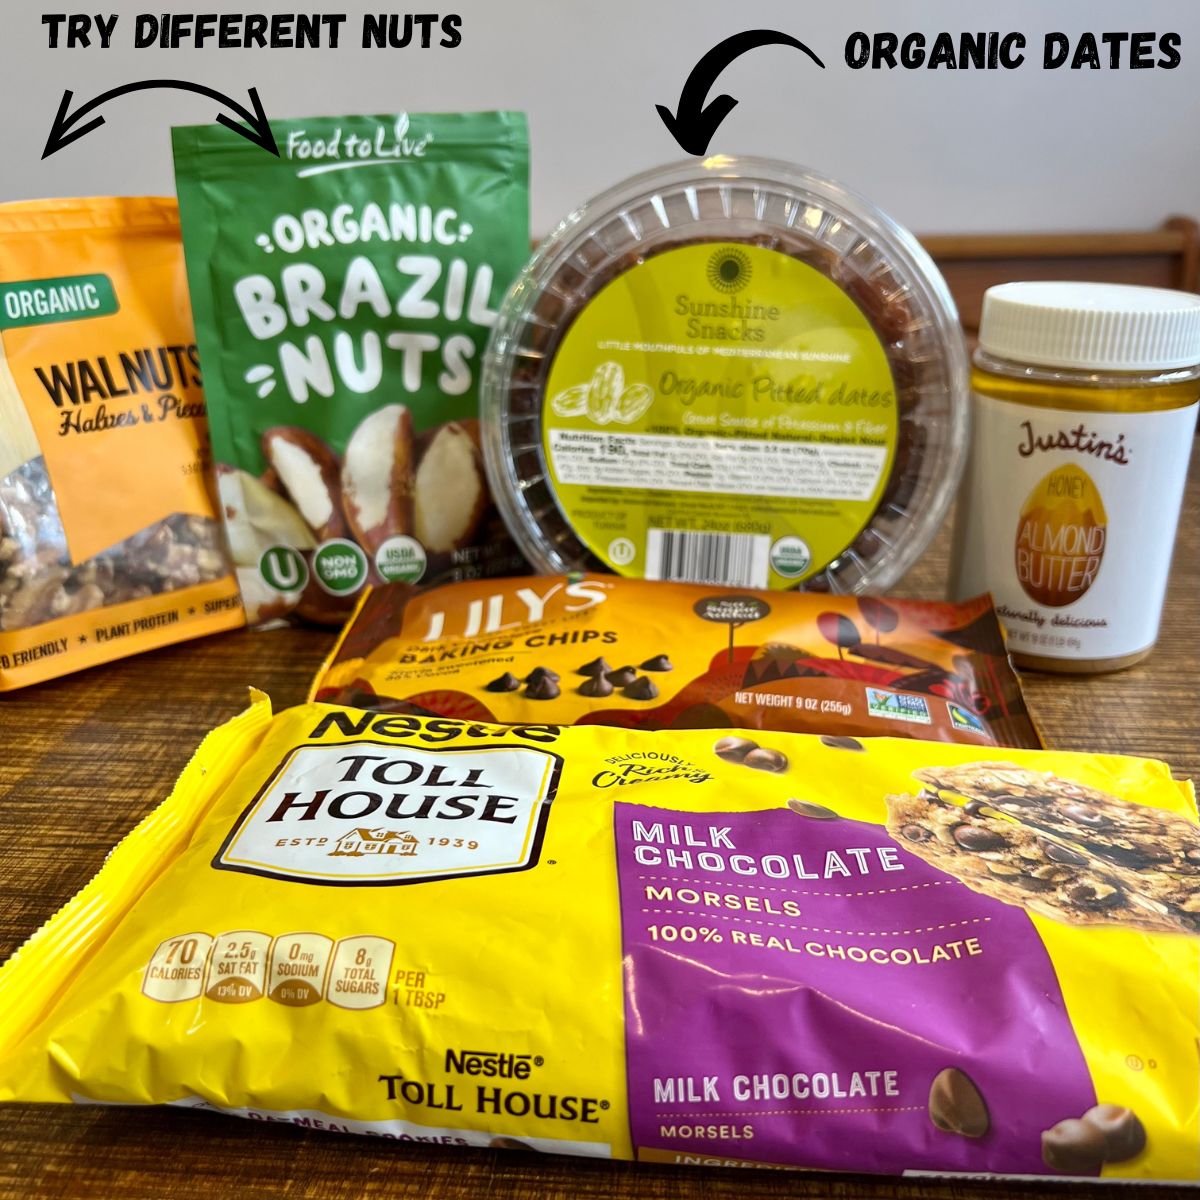 Ingredients for healthy snicker bars walnuts, Brazil nuts dares, almond butter and chocolate chips